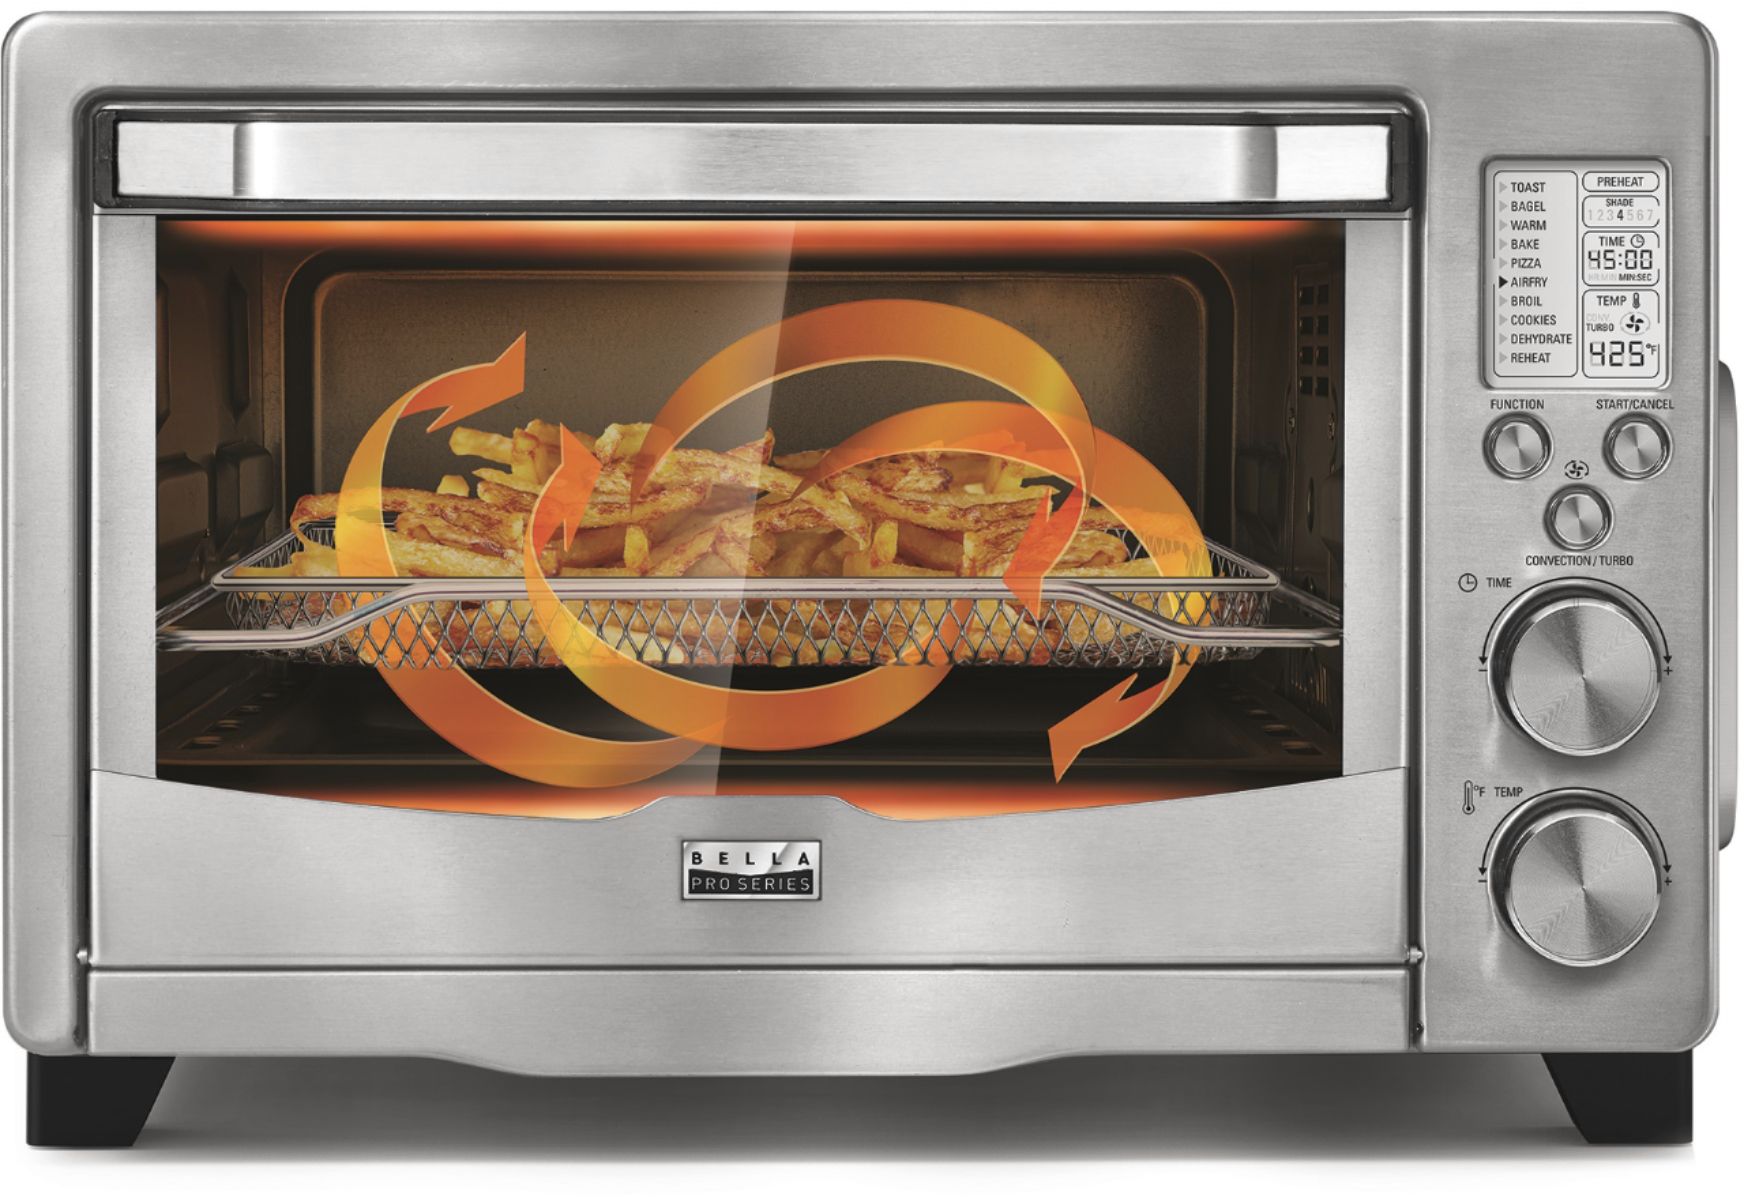 Bella Pro Series 6 Slice Toaster Oven Air Fryer Stainless Steel